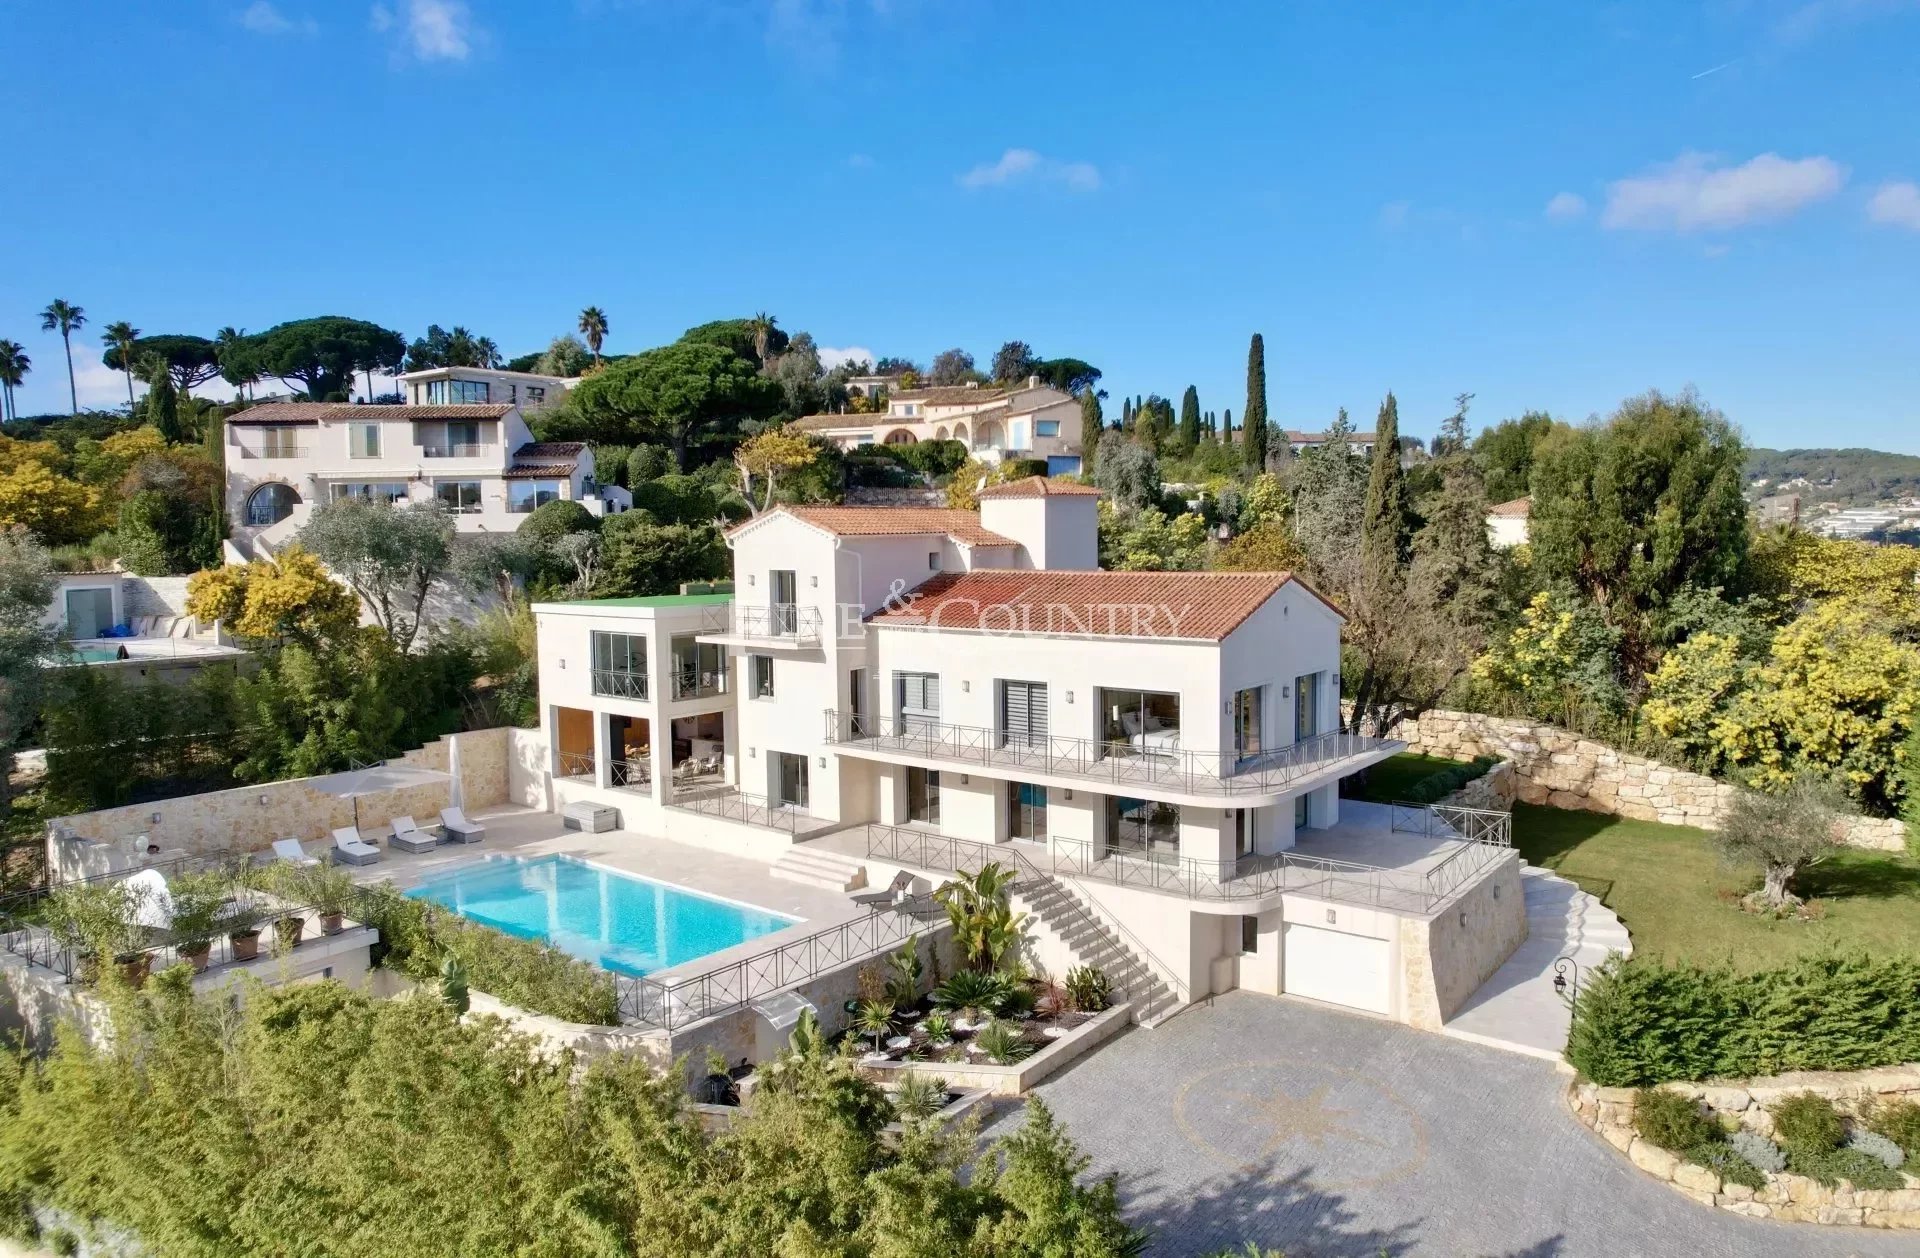 Villa for sale in Super Cannes with mountains and sea views